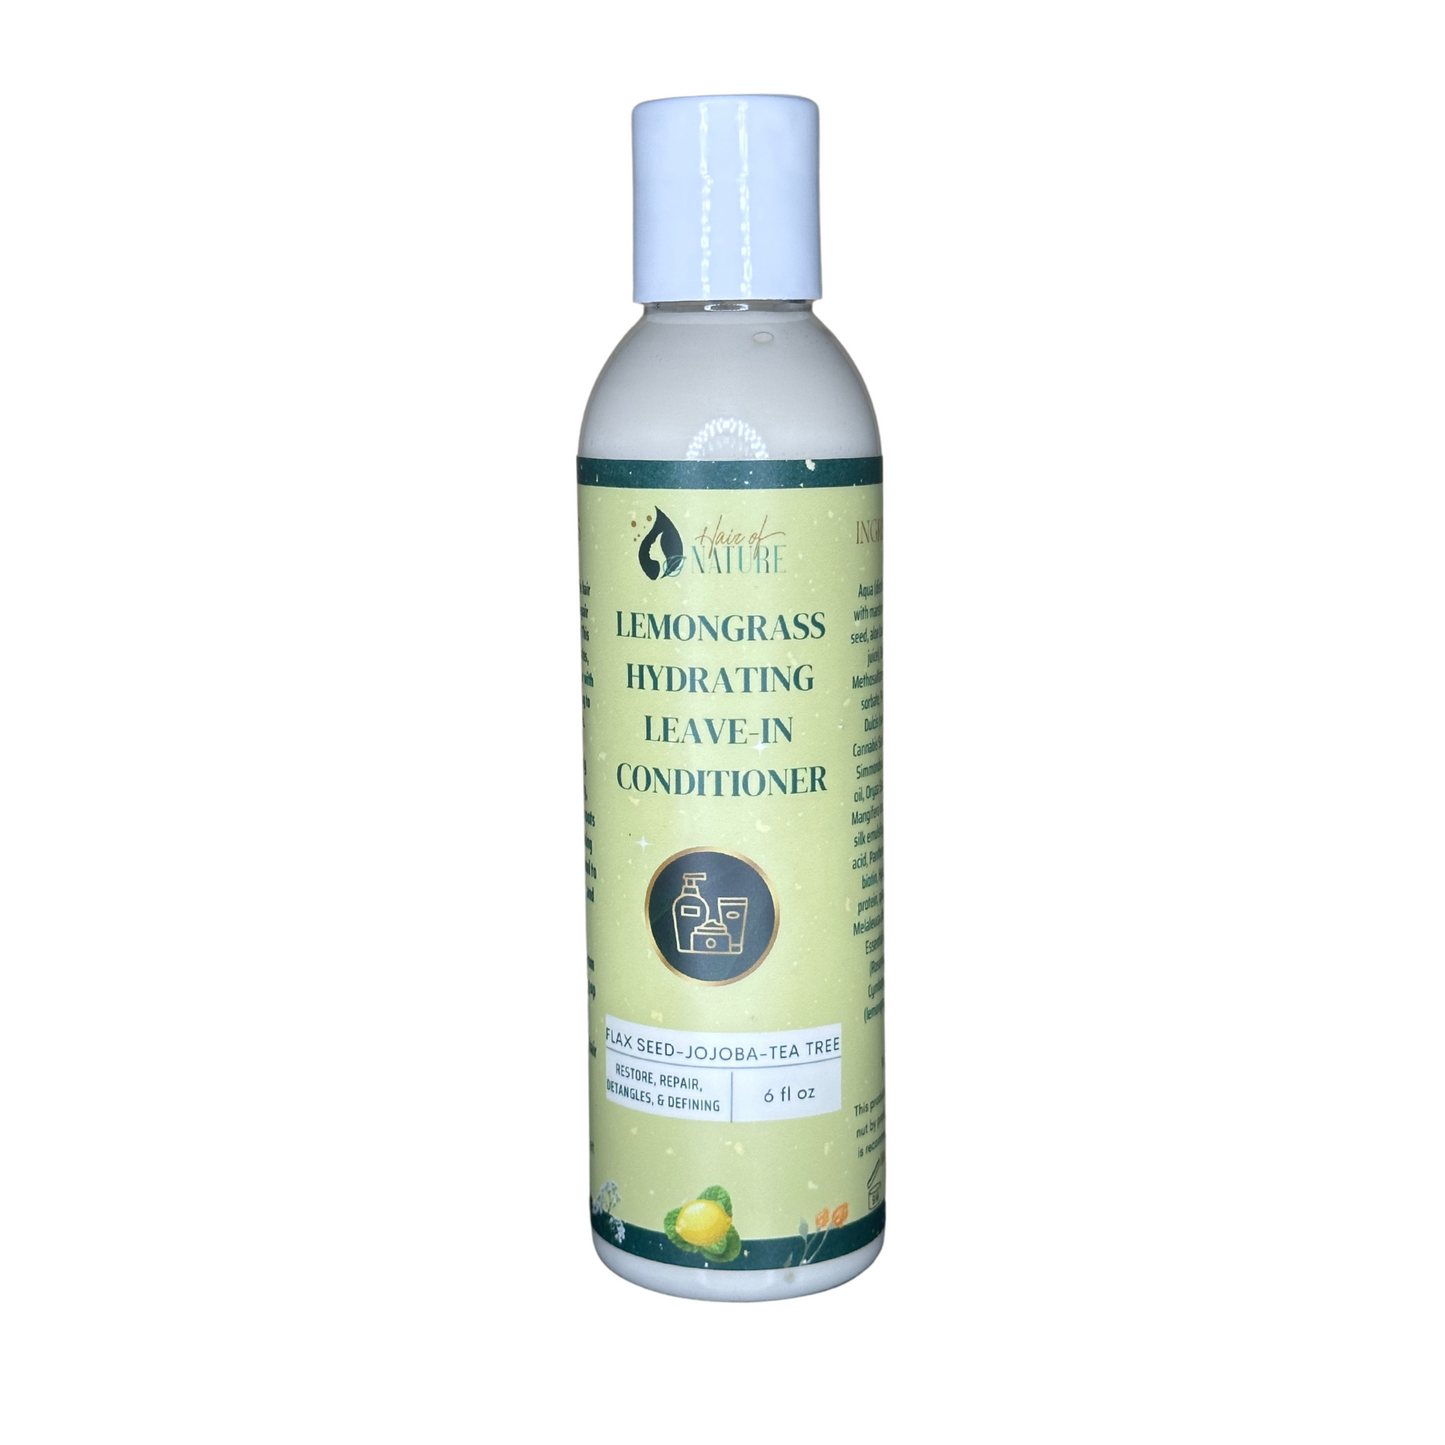 Lemongrass Hydrating Leave in Conditioner